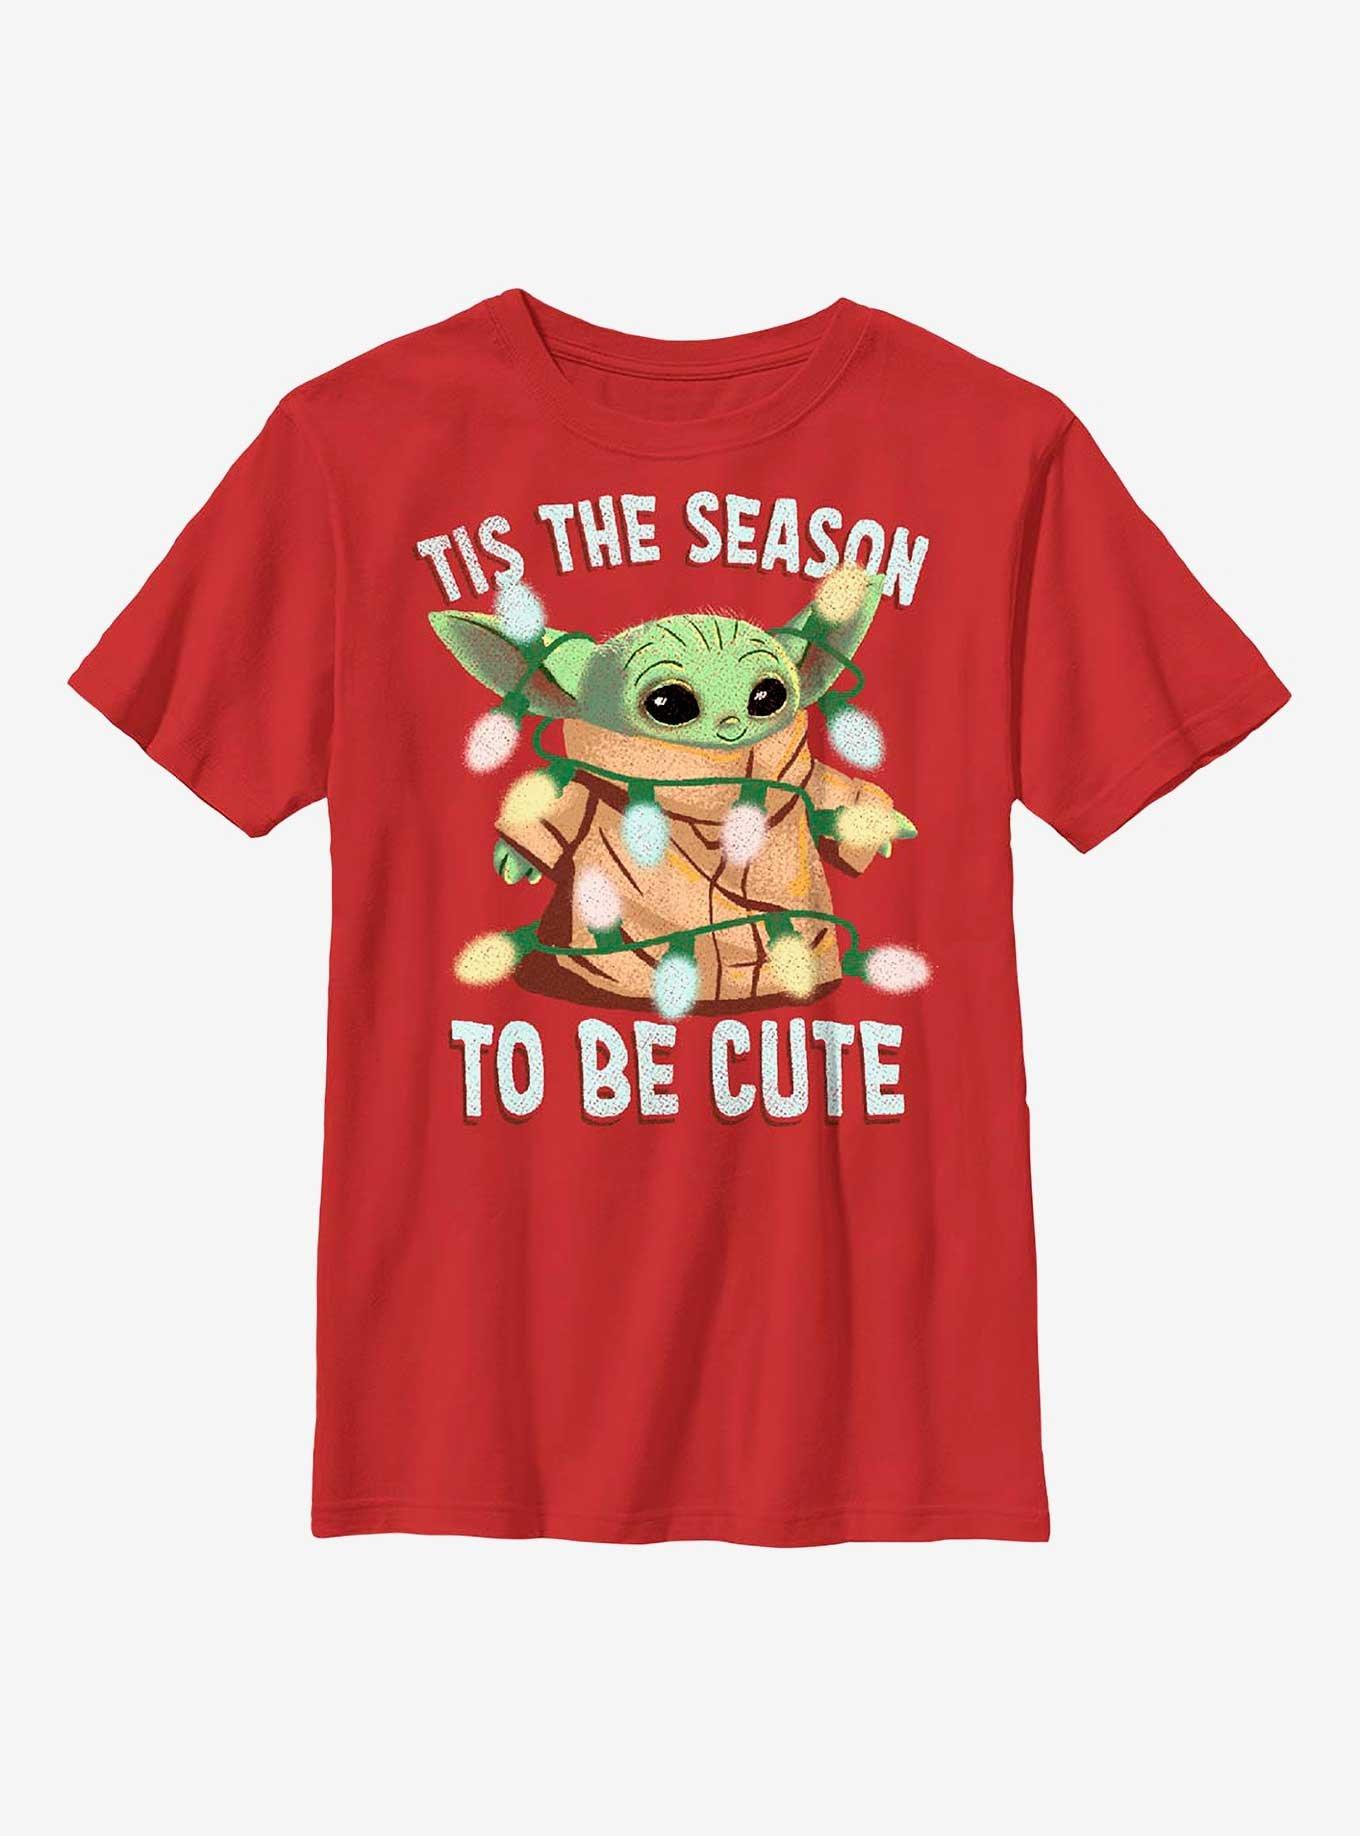 Star Wars The Mandalorian Grogu To Be Cute Youth T-Shirt, RED, hi-res